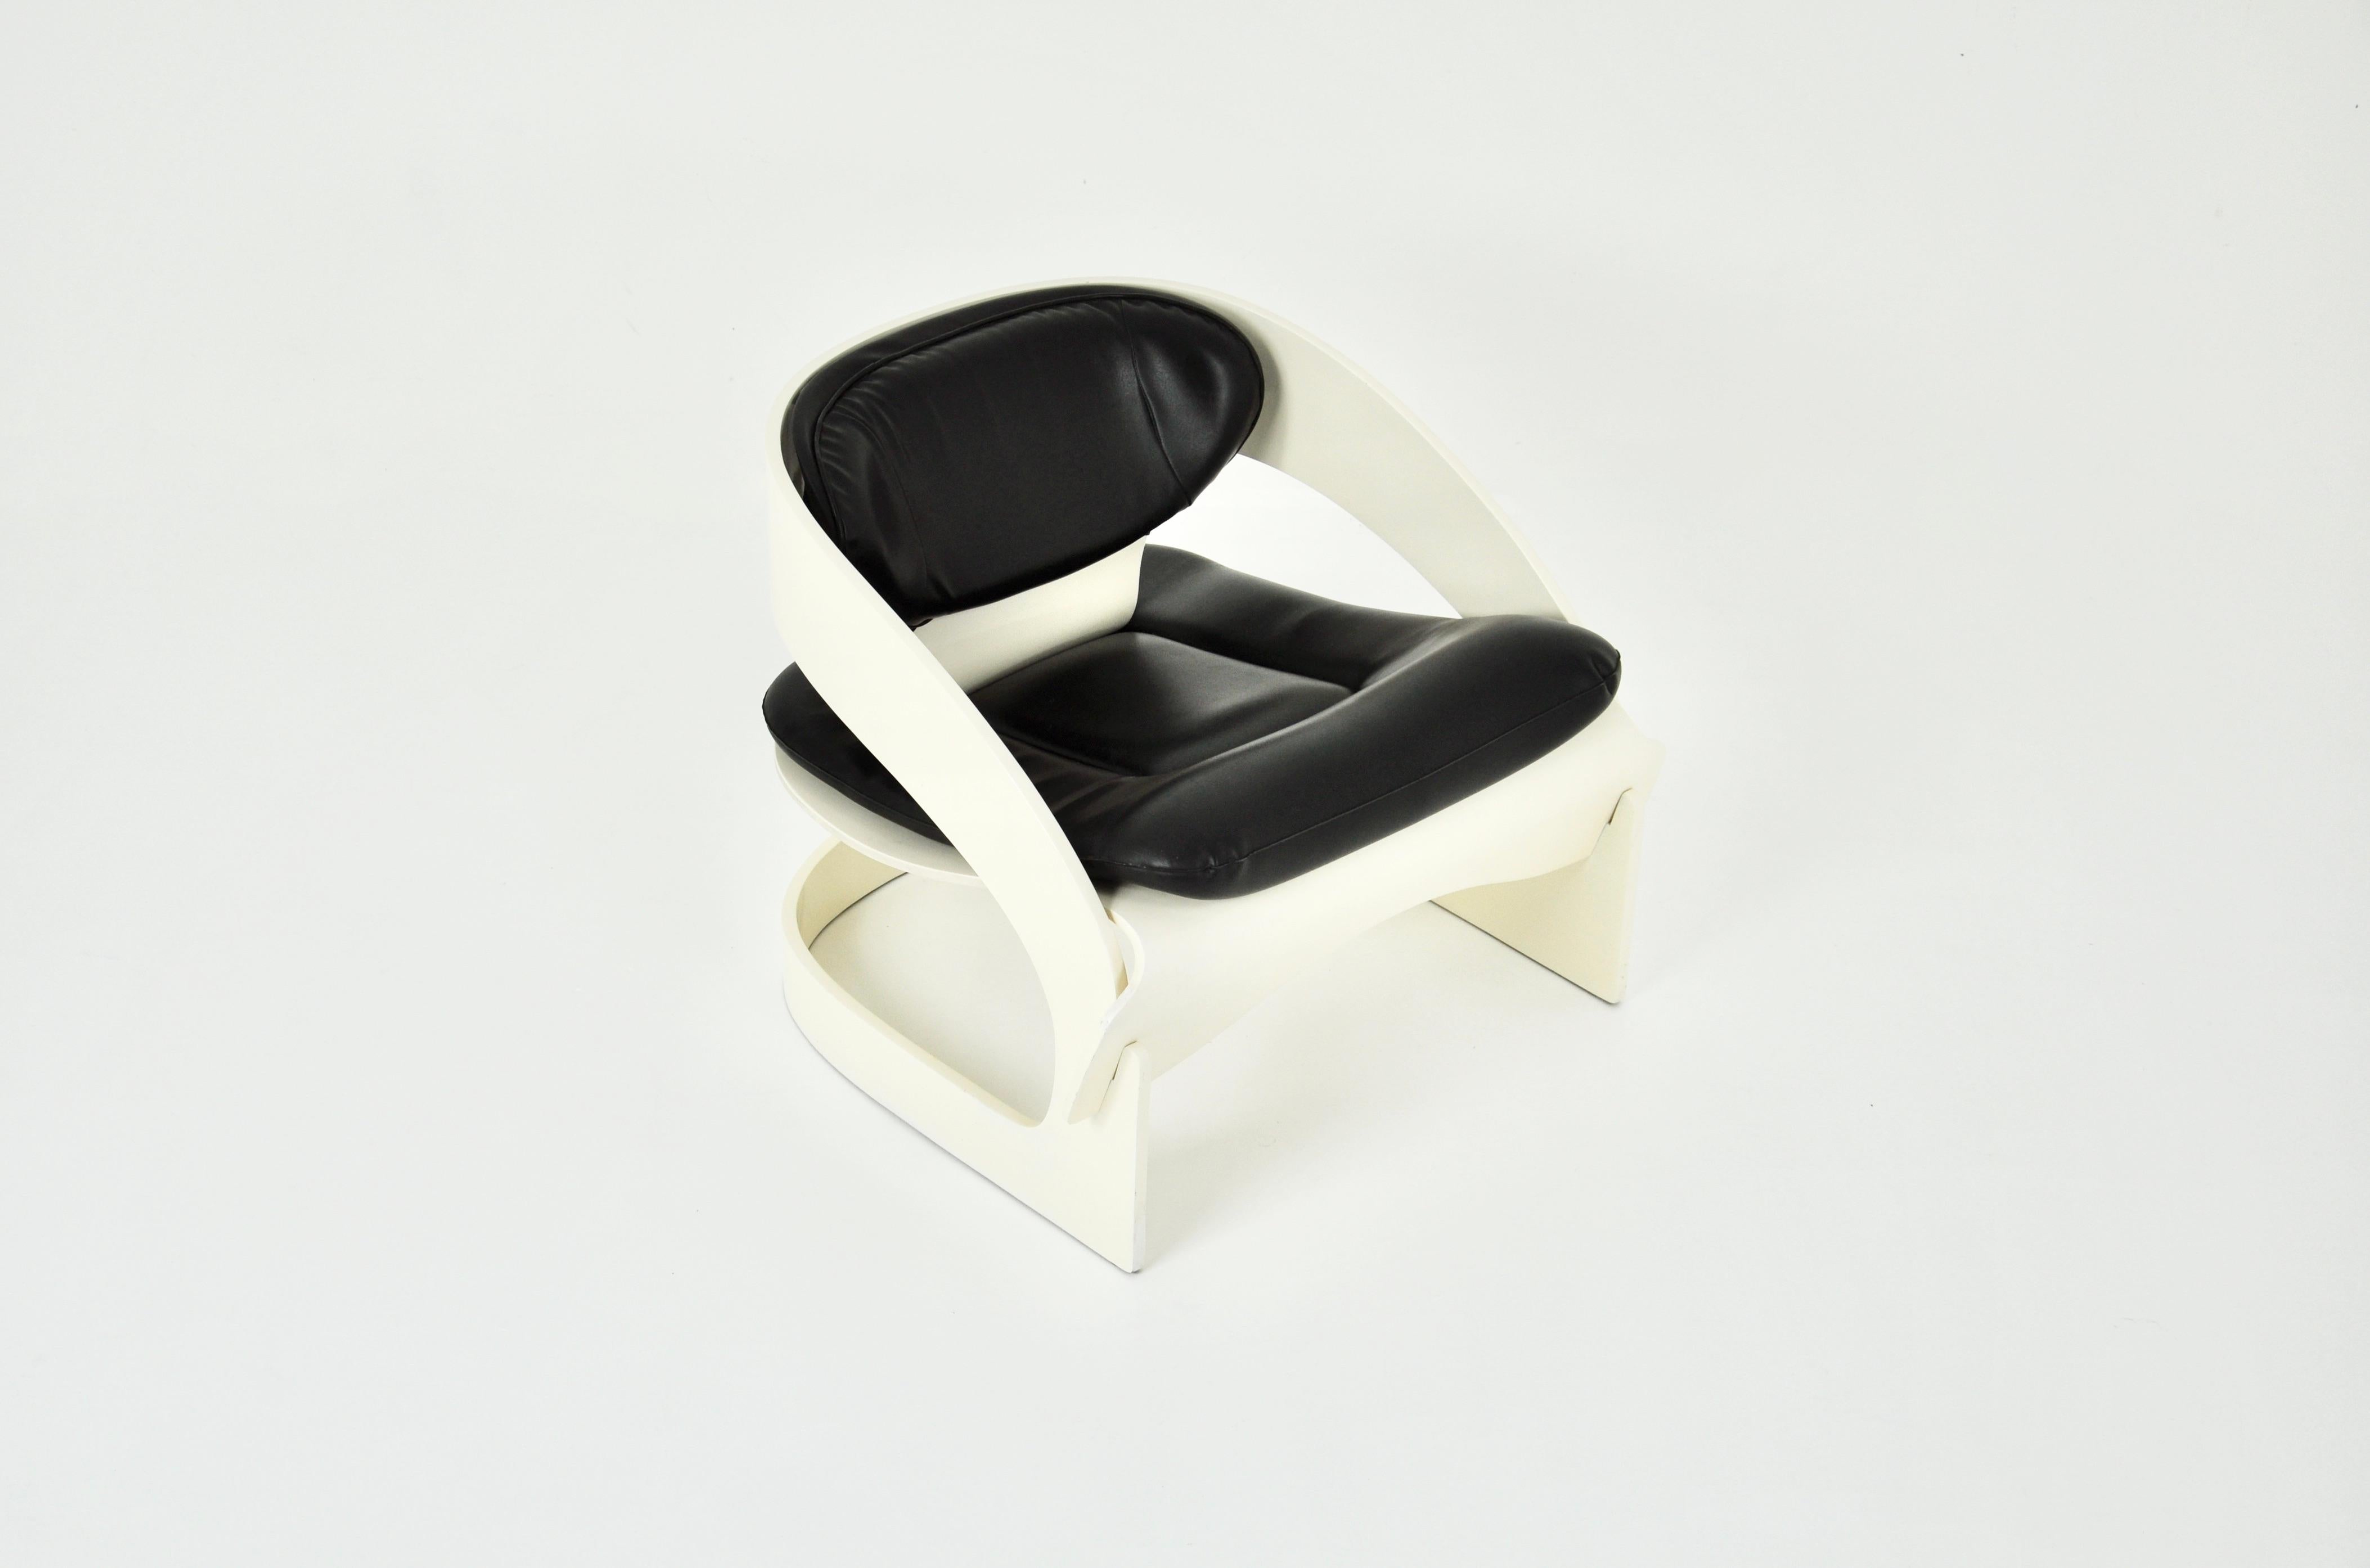 White wooden armchair with black leather cushion. Made in limited numbers: Numbered 8. Seat height 40cm. Wear due to age and time